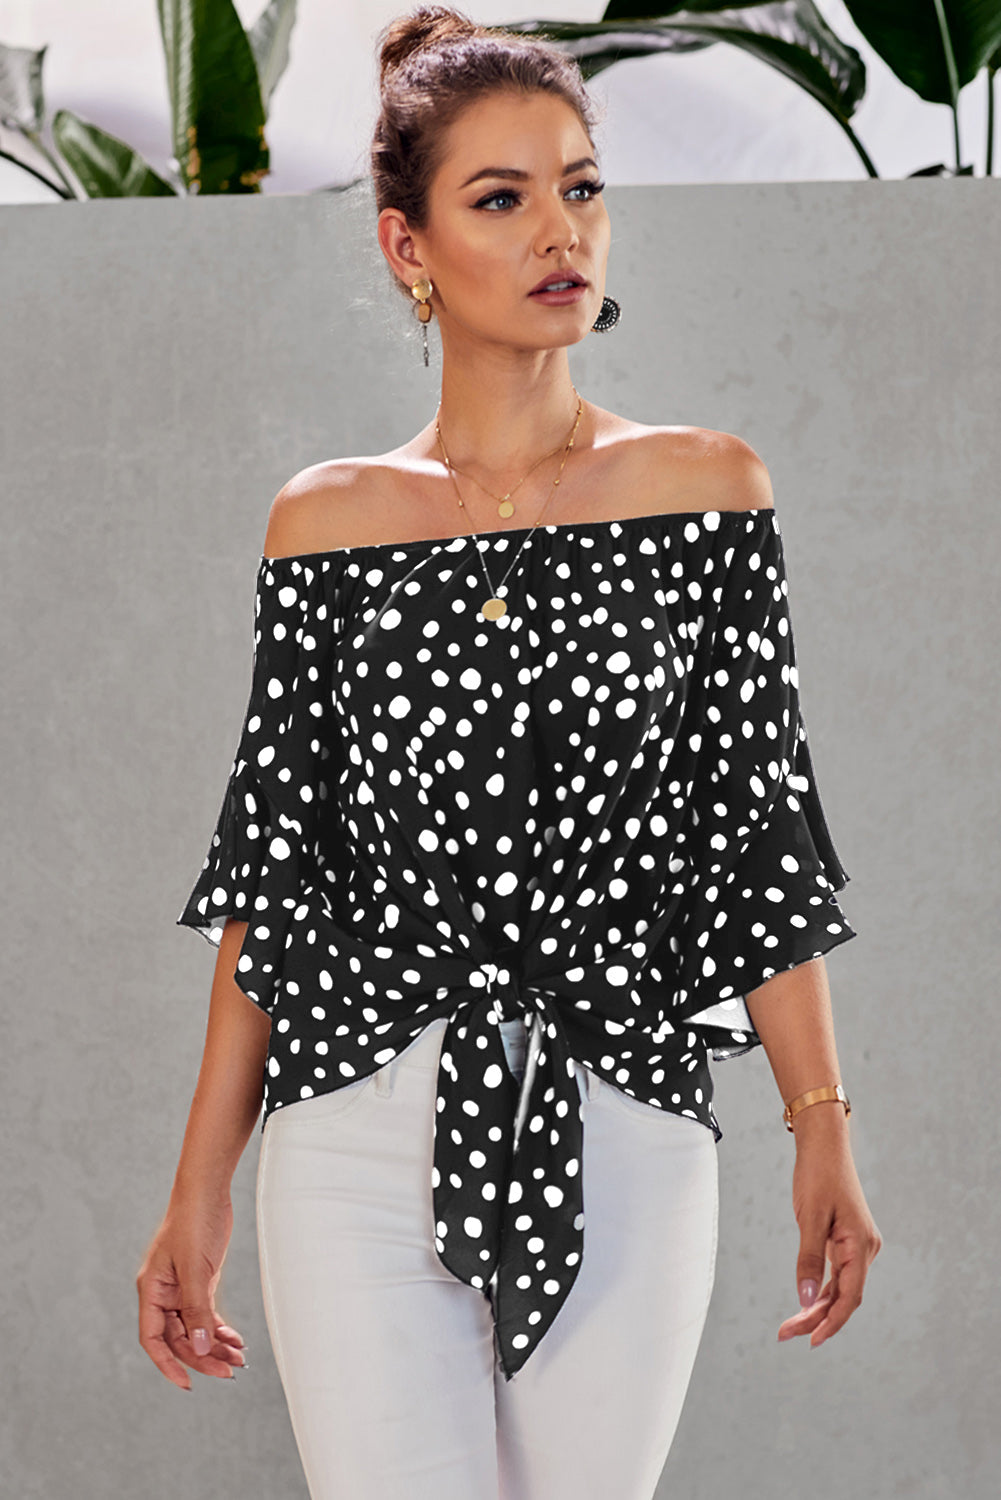 Women's Polka Dot 3/4 Bell Sleeve Off Shoulder Front Tie Knot Top Blouse Cozy Casual Pullover Shirt Sai Feel